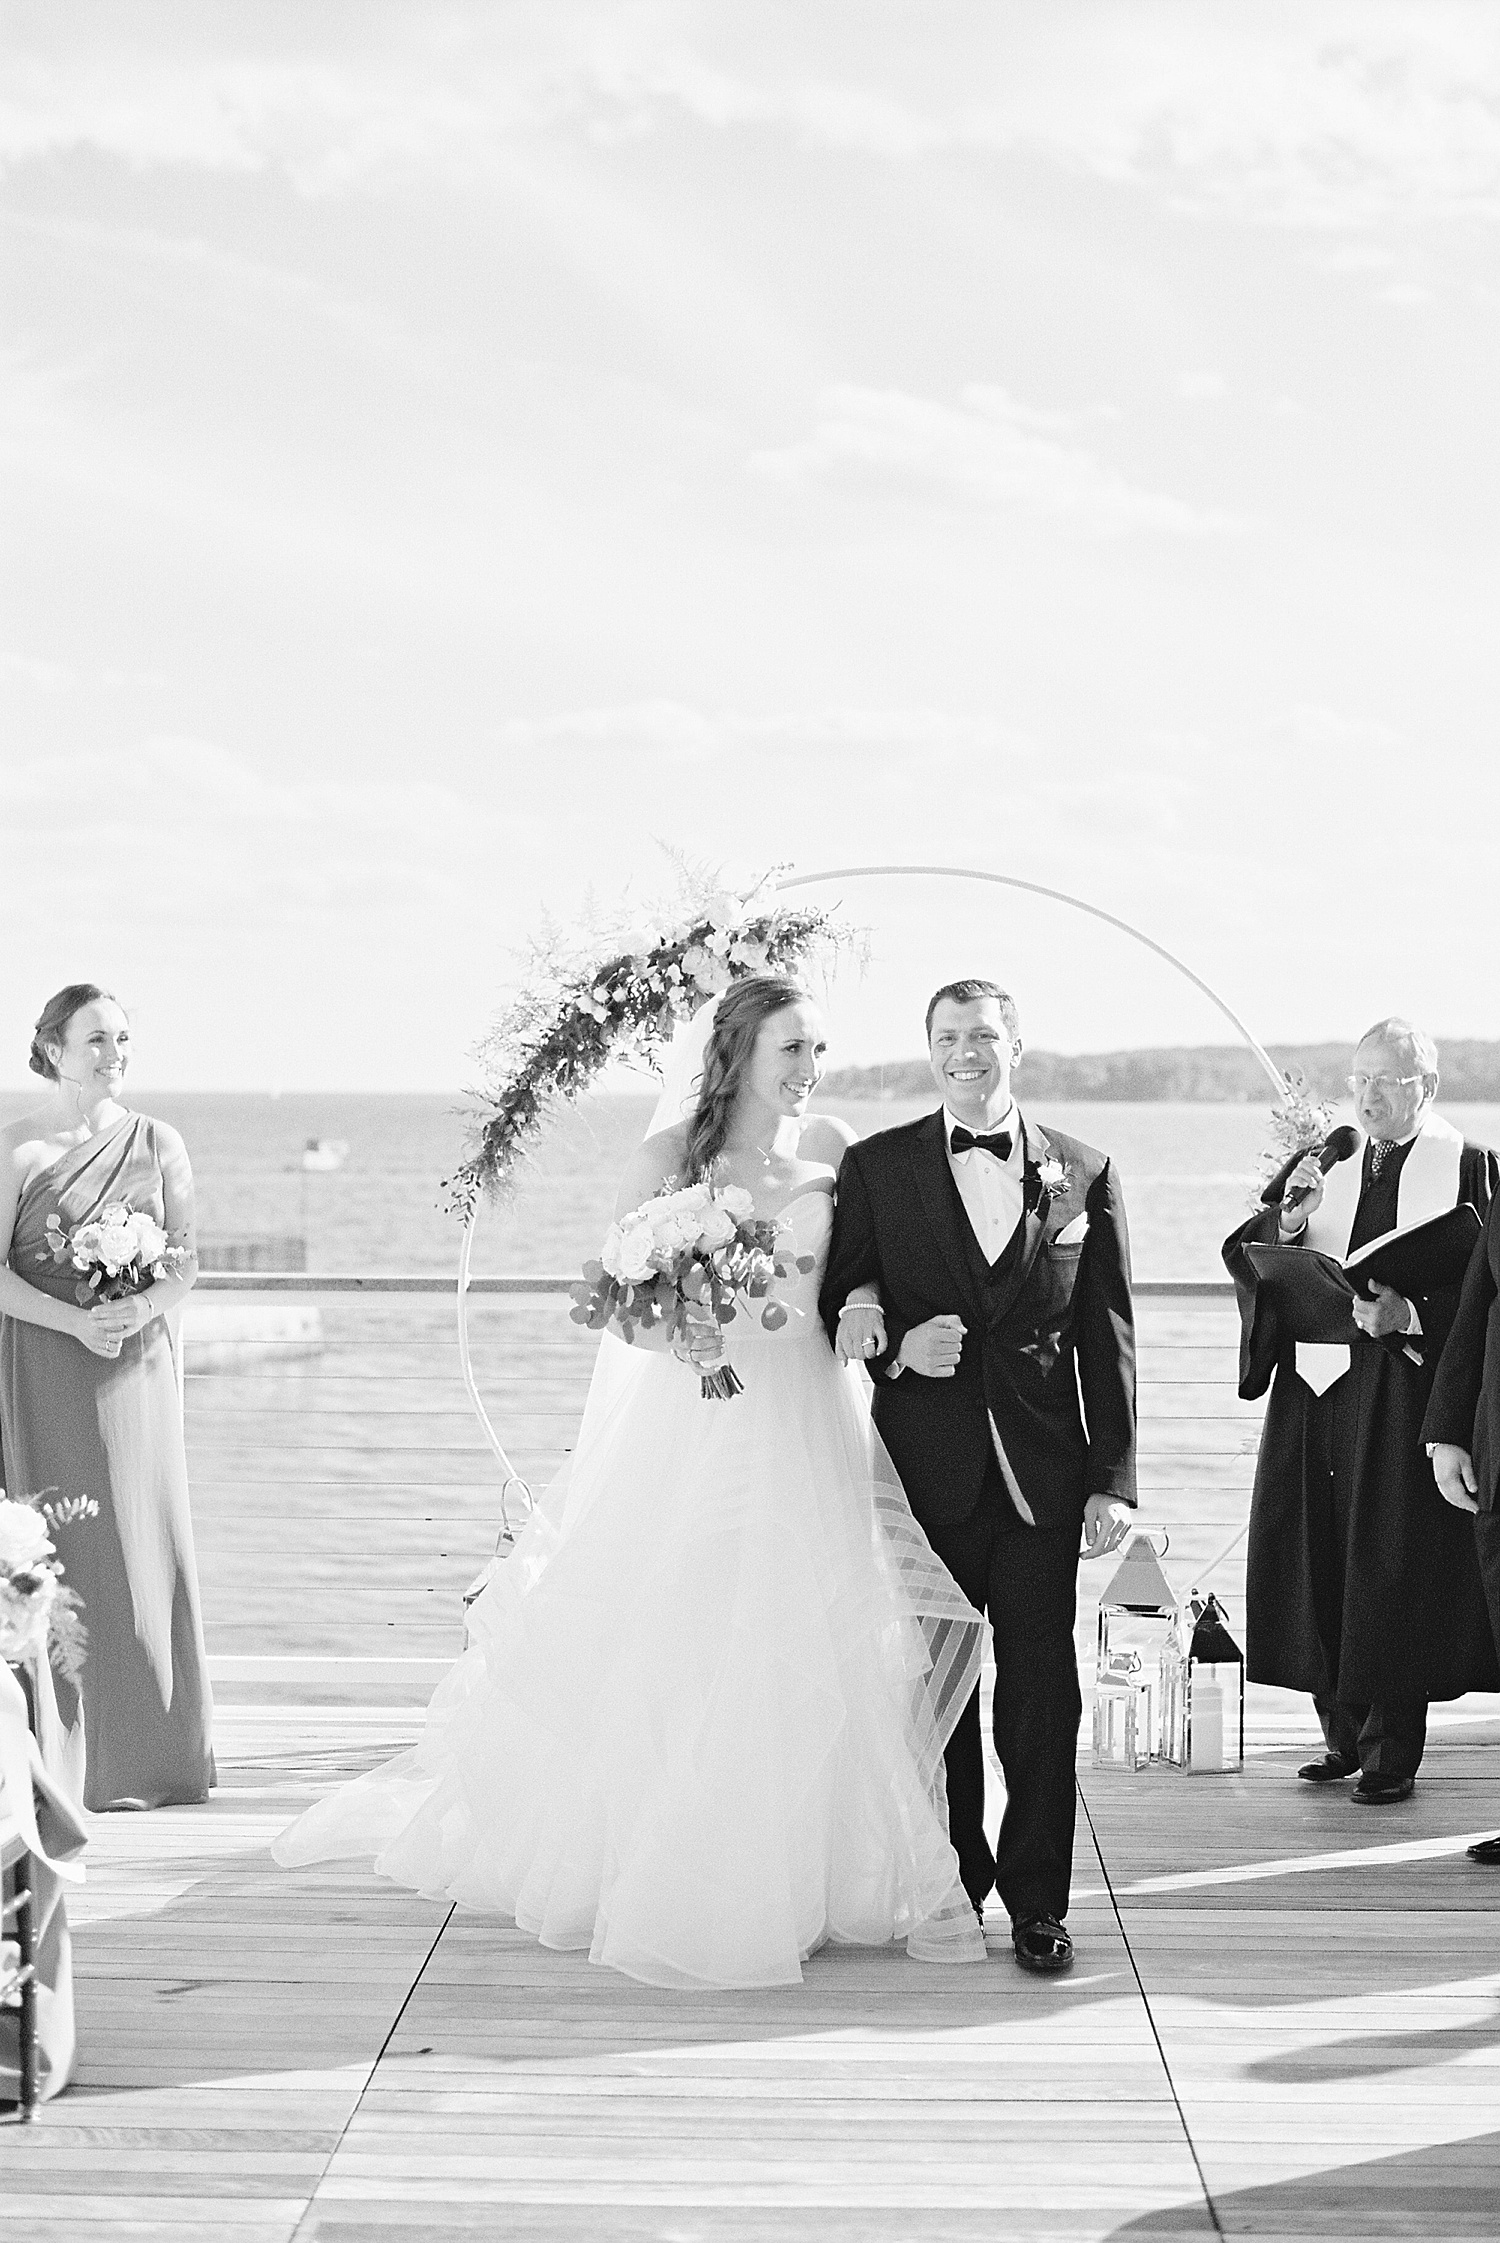 Bride and groom walking back down the aisle by Lynne Reznick photography